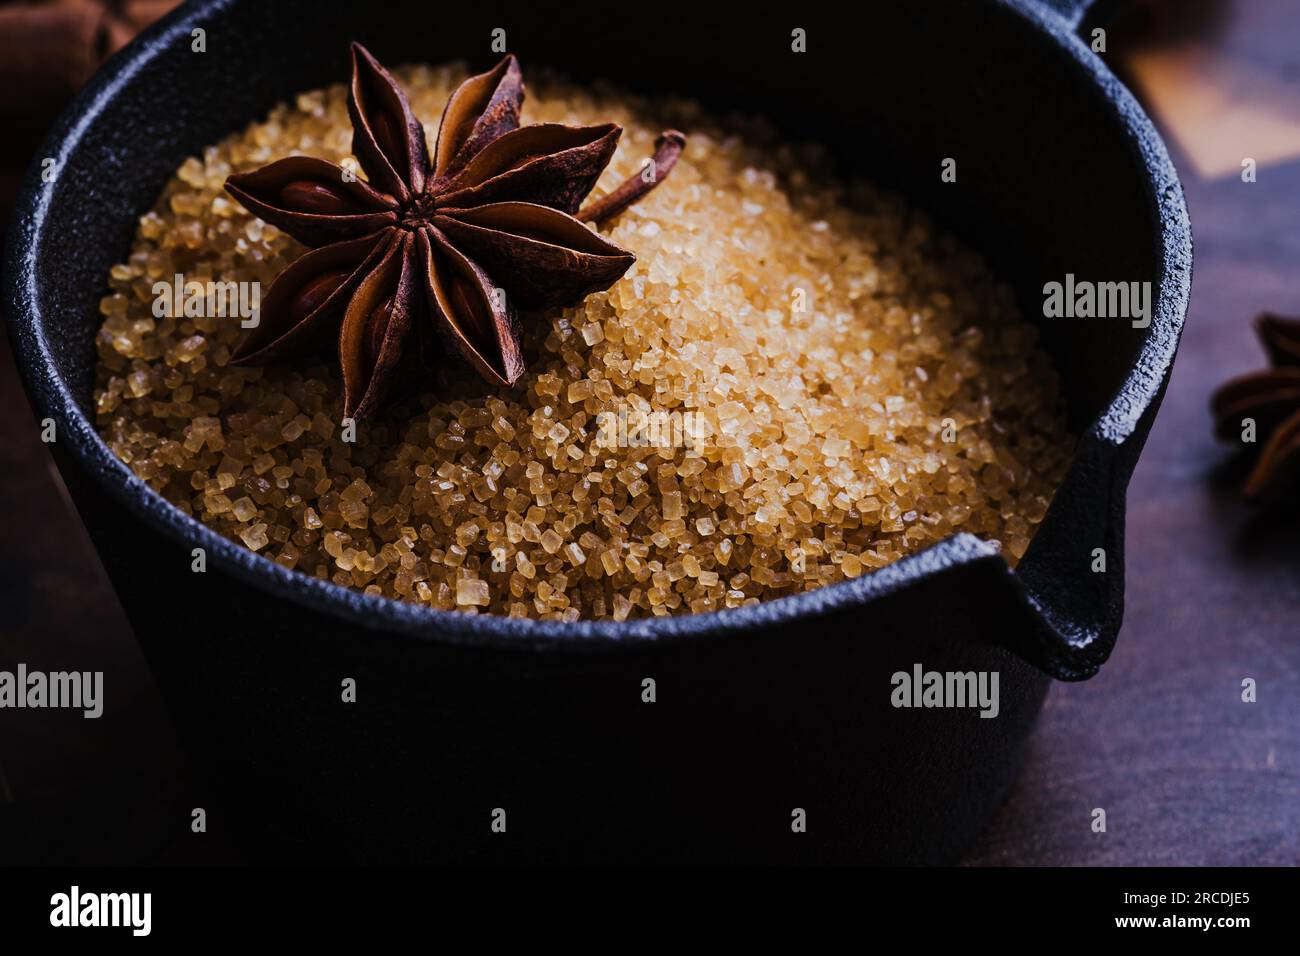 Christmas baking ingredients of gingerbread. Anise and brown sugar in cast iron pan close up Stock Photo